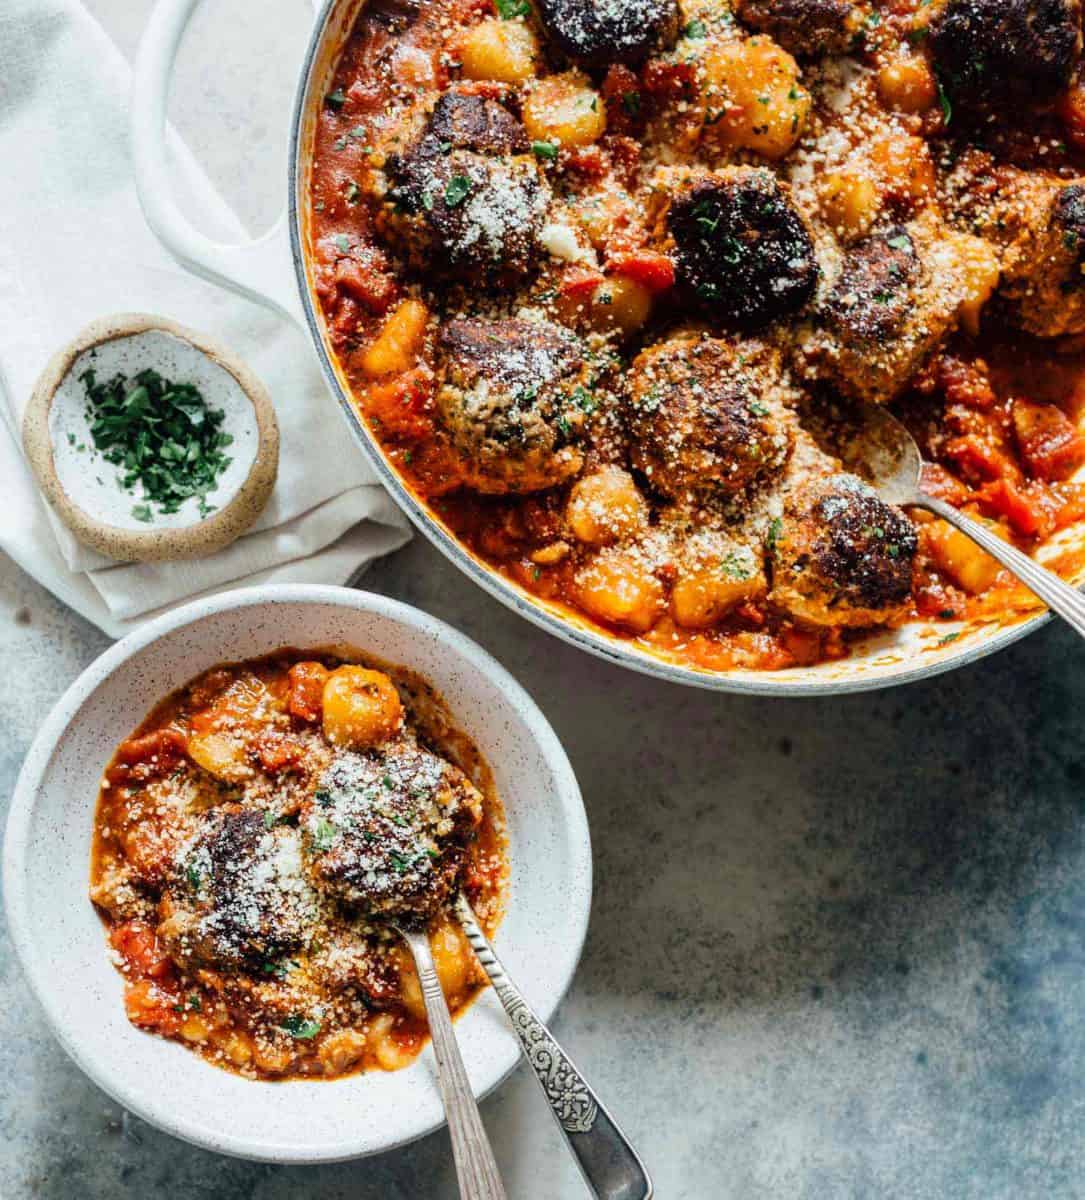 Cauliflower gnocchi and meatballs is a cozy alternative to the classic spaghetti and meatballs. All made in one-skillet! Who can complain?!